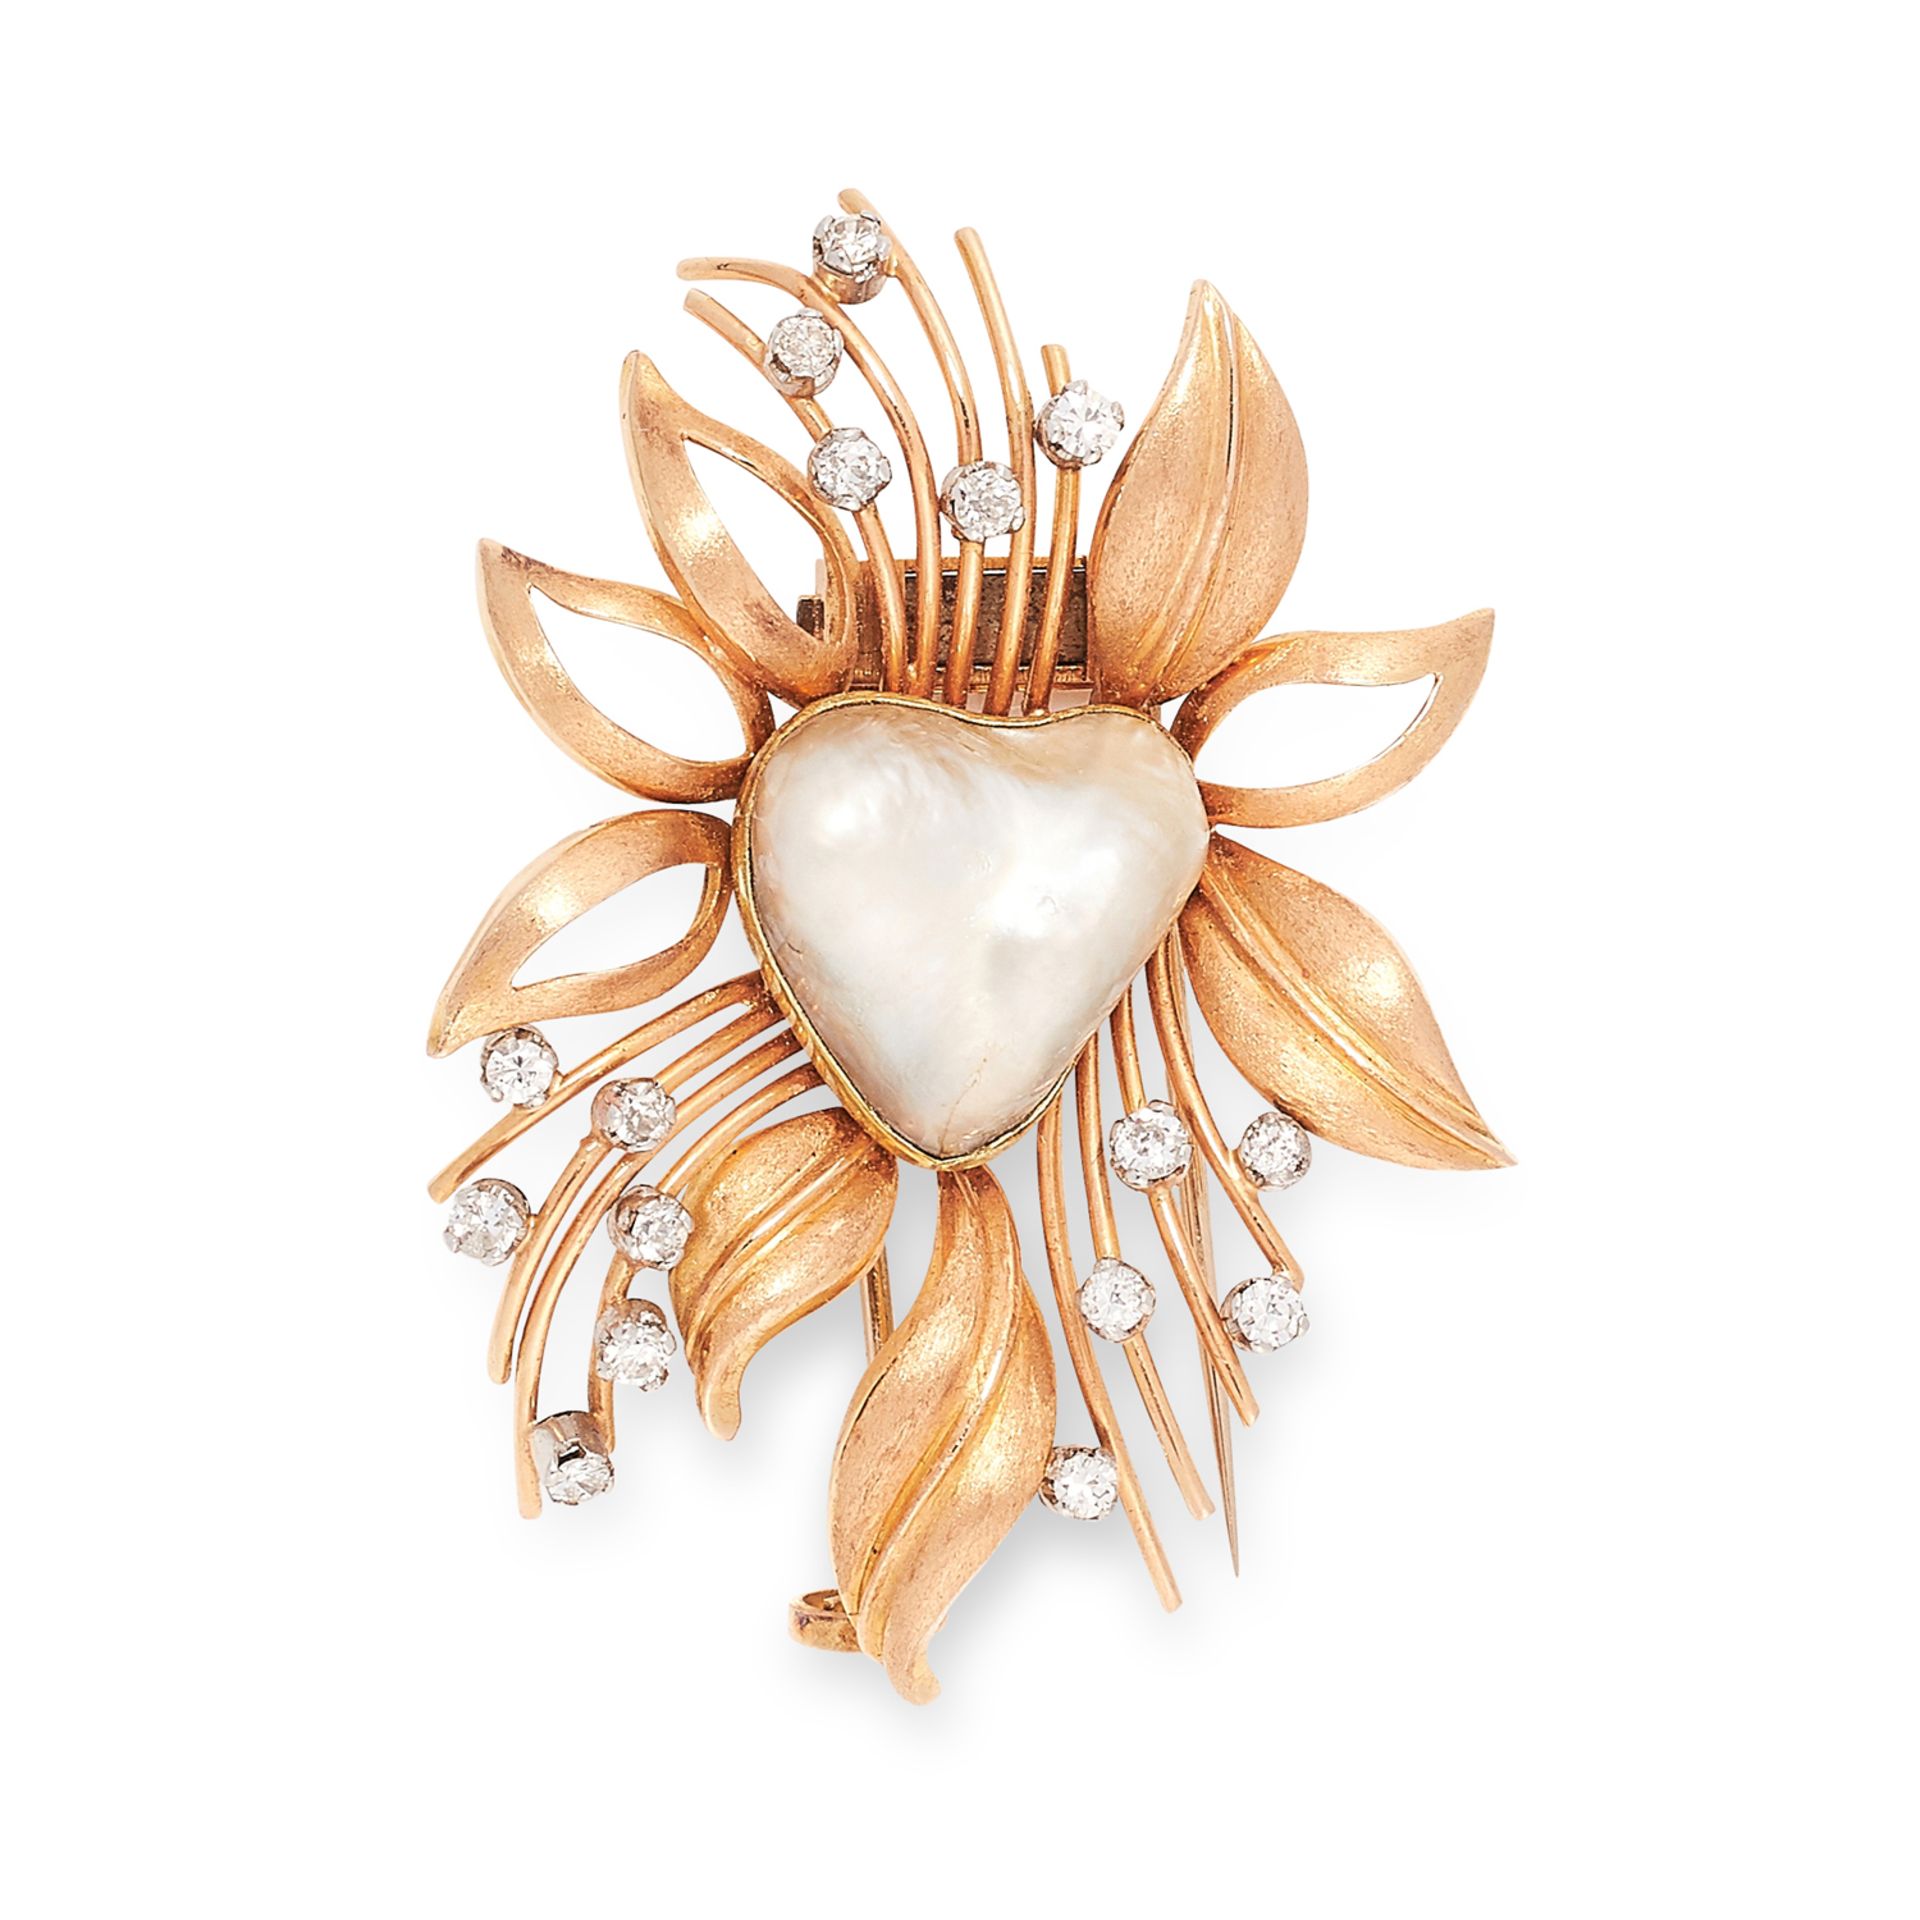 A VINTAGE PEARL AND DIAMOND BROOCH, 20TH CENTURY set with a central heart shaped baroque pearl of